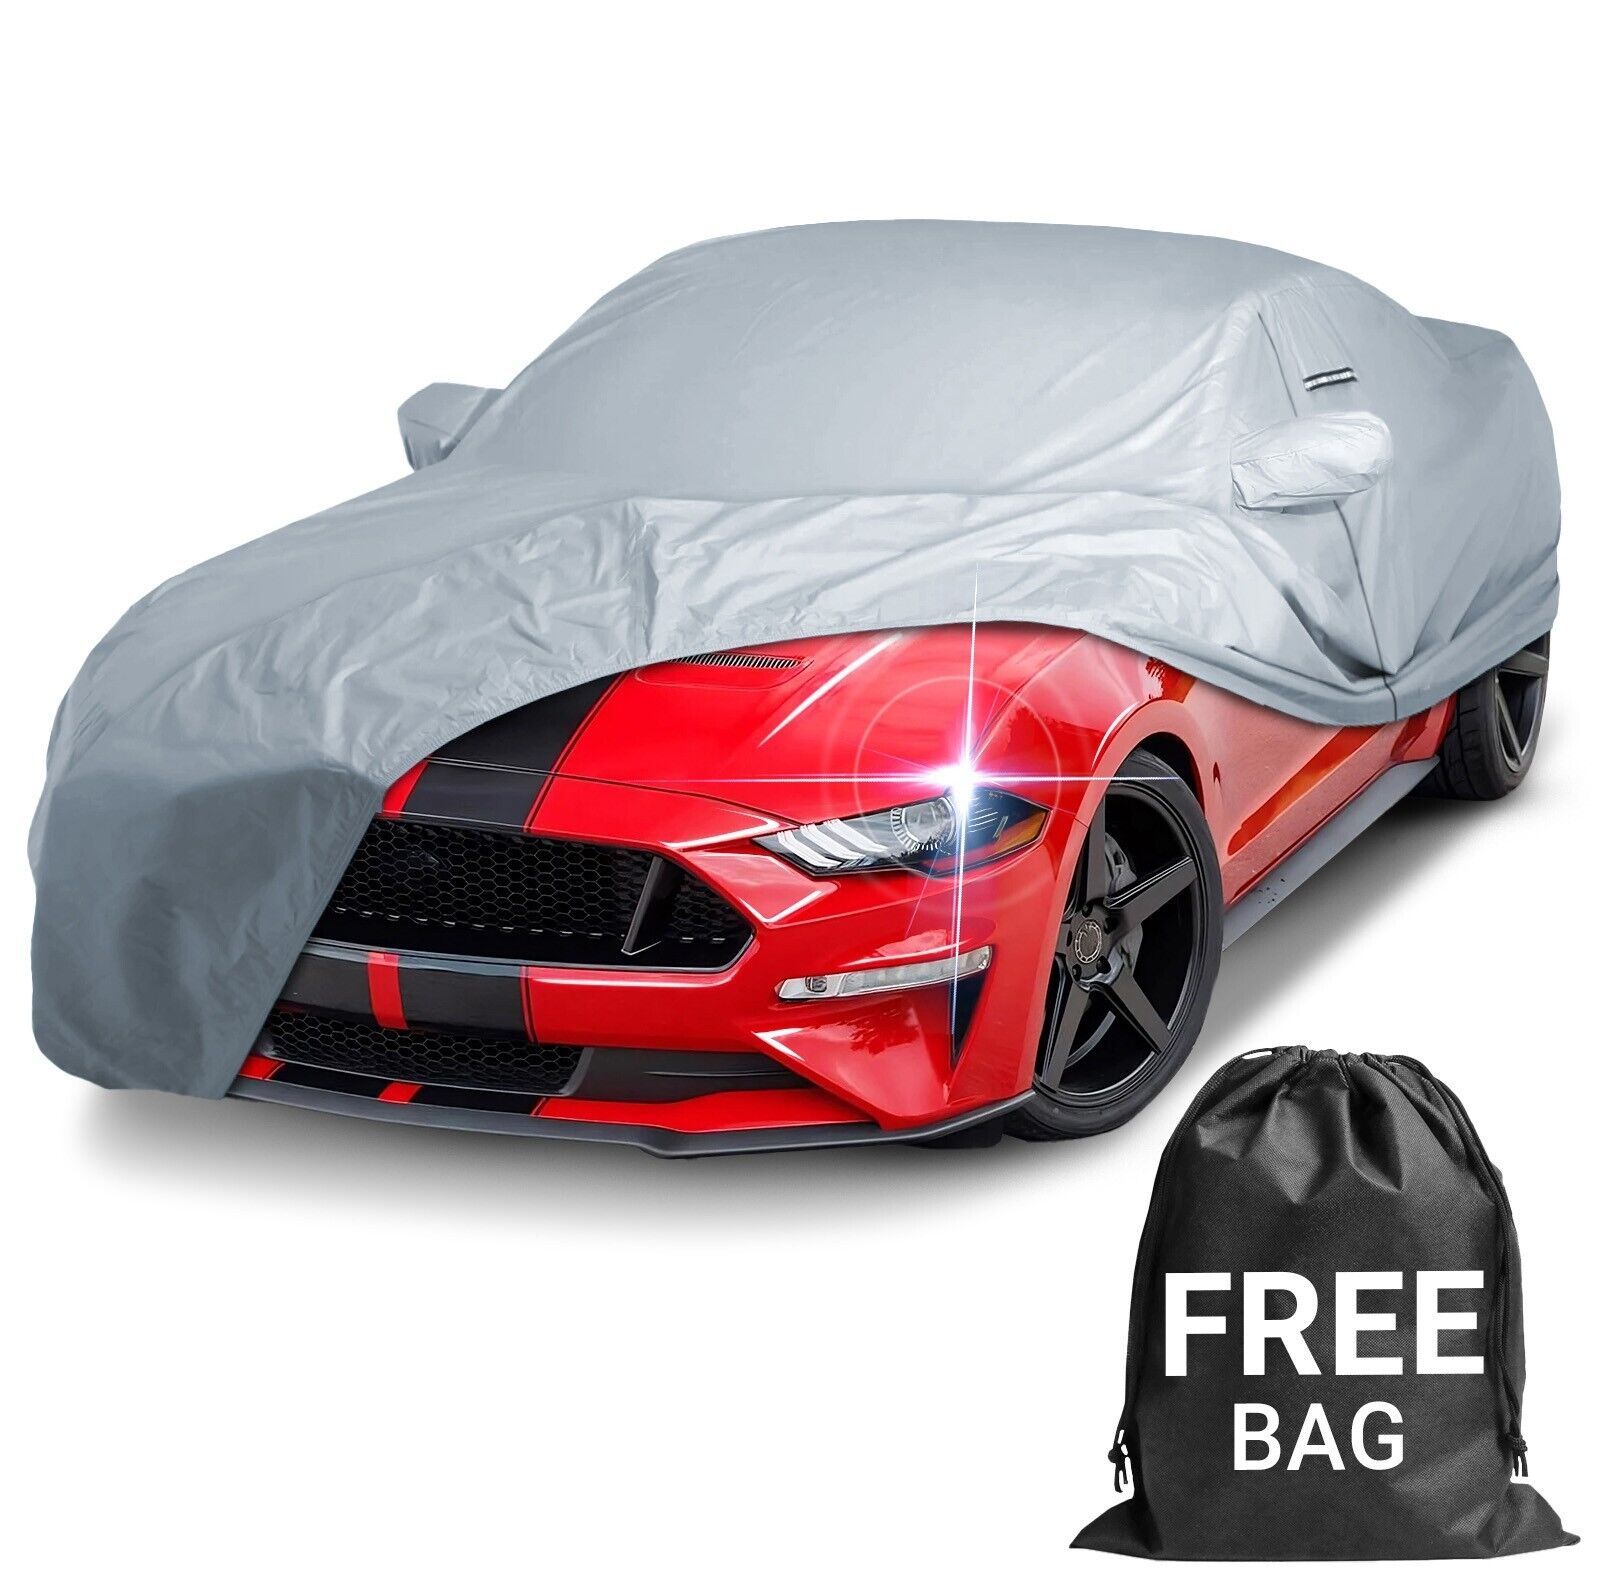 1999-2022 Ford Mustang Roush Custom Car Cover - All-Weather Waterproof Outdoor